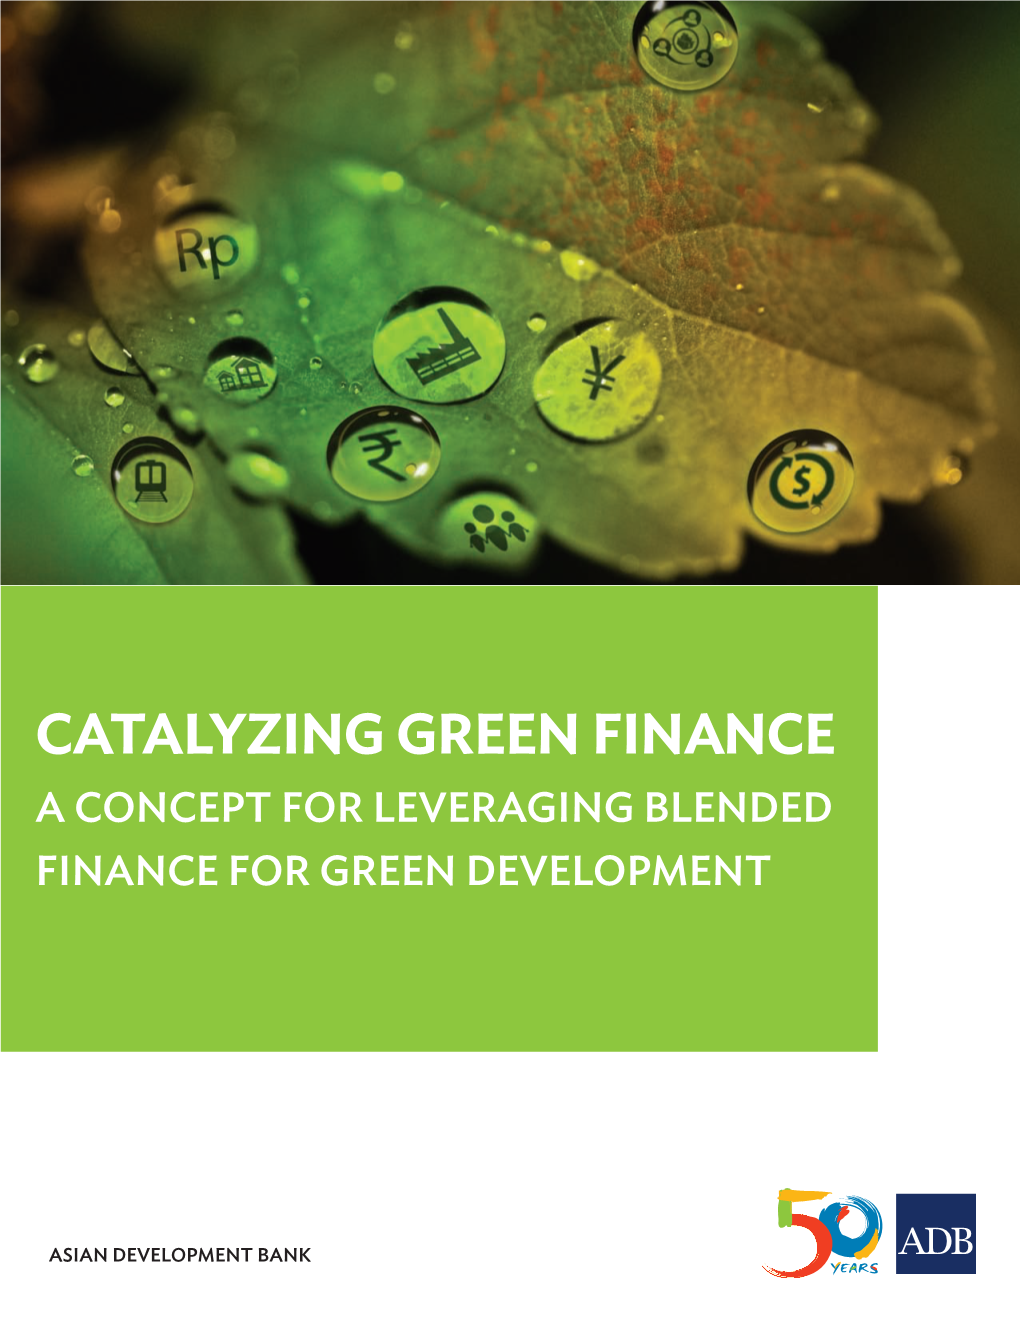 Catalyzing Green Finance: a Concept for Leveraging Blended